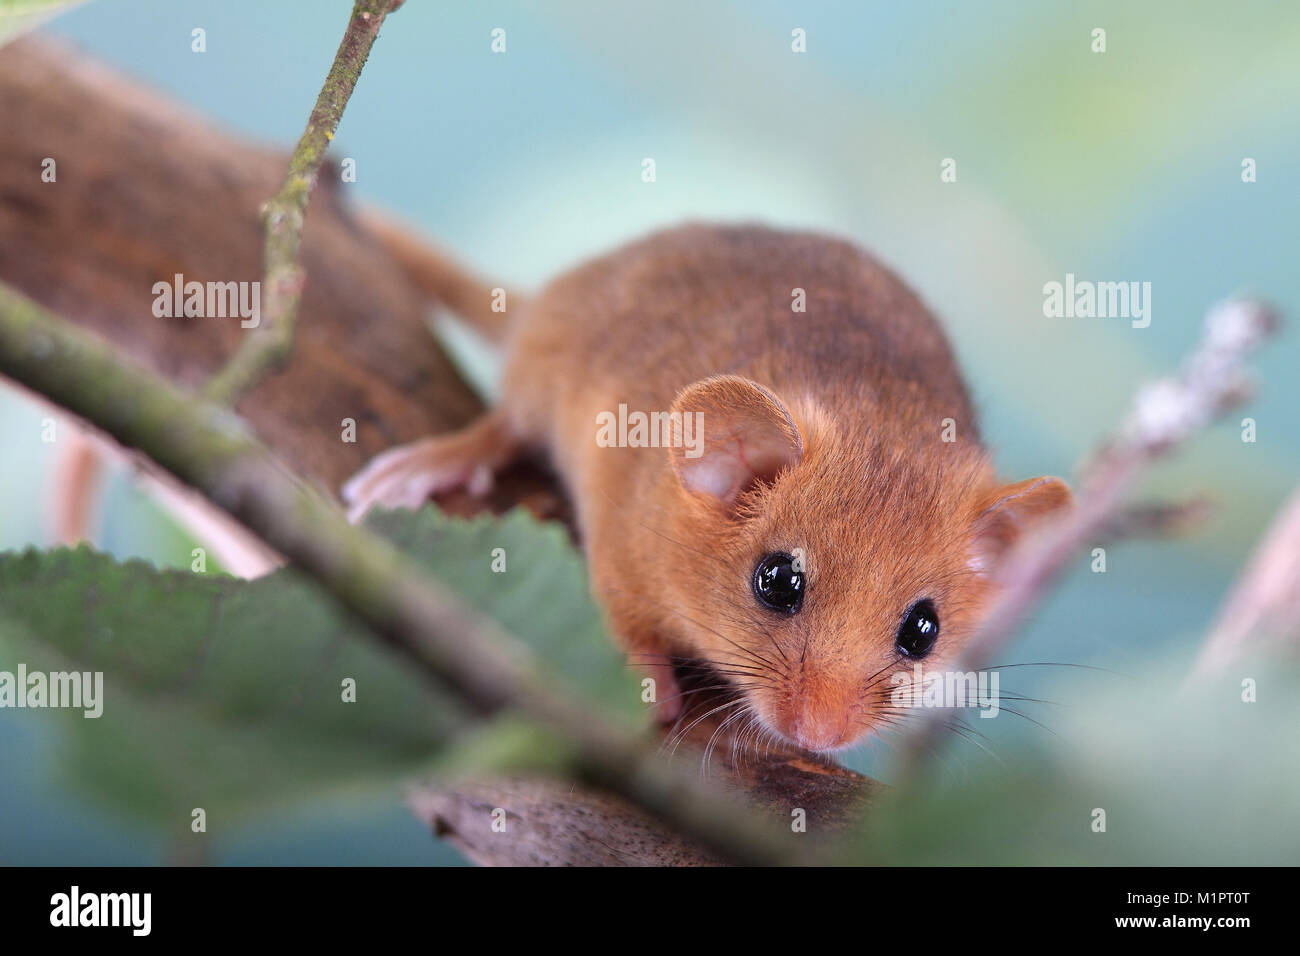 Dormouse Muscardinus Avella Arius in a raspberry shrub, Haselmaus Muscardinus avellanarius in einem Himbeerstrauch Stock Photo